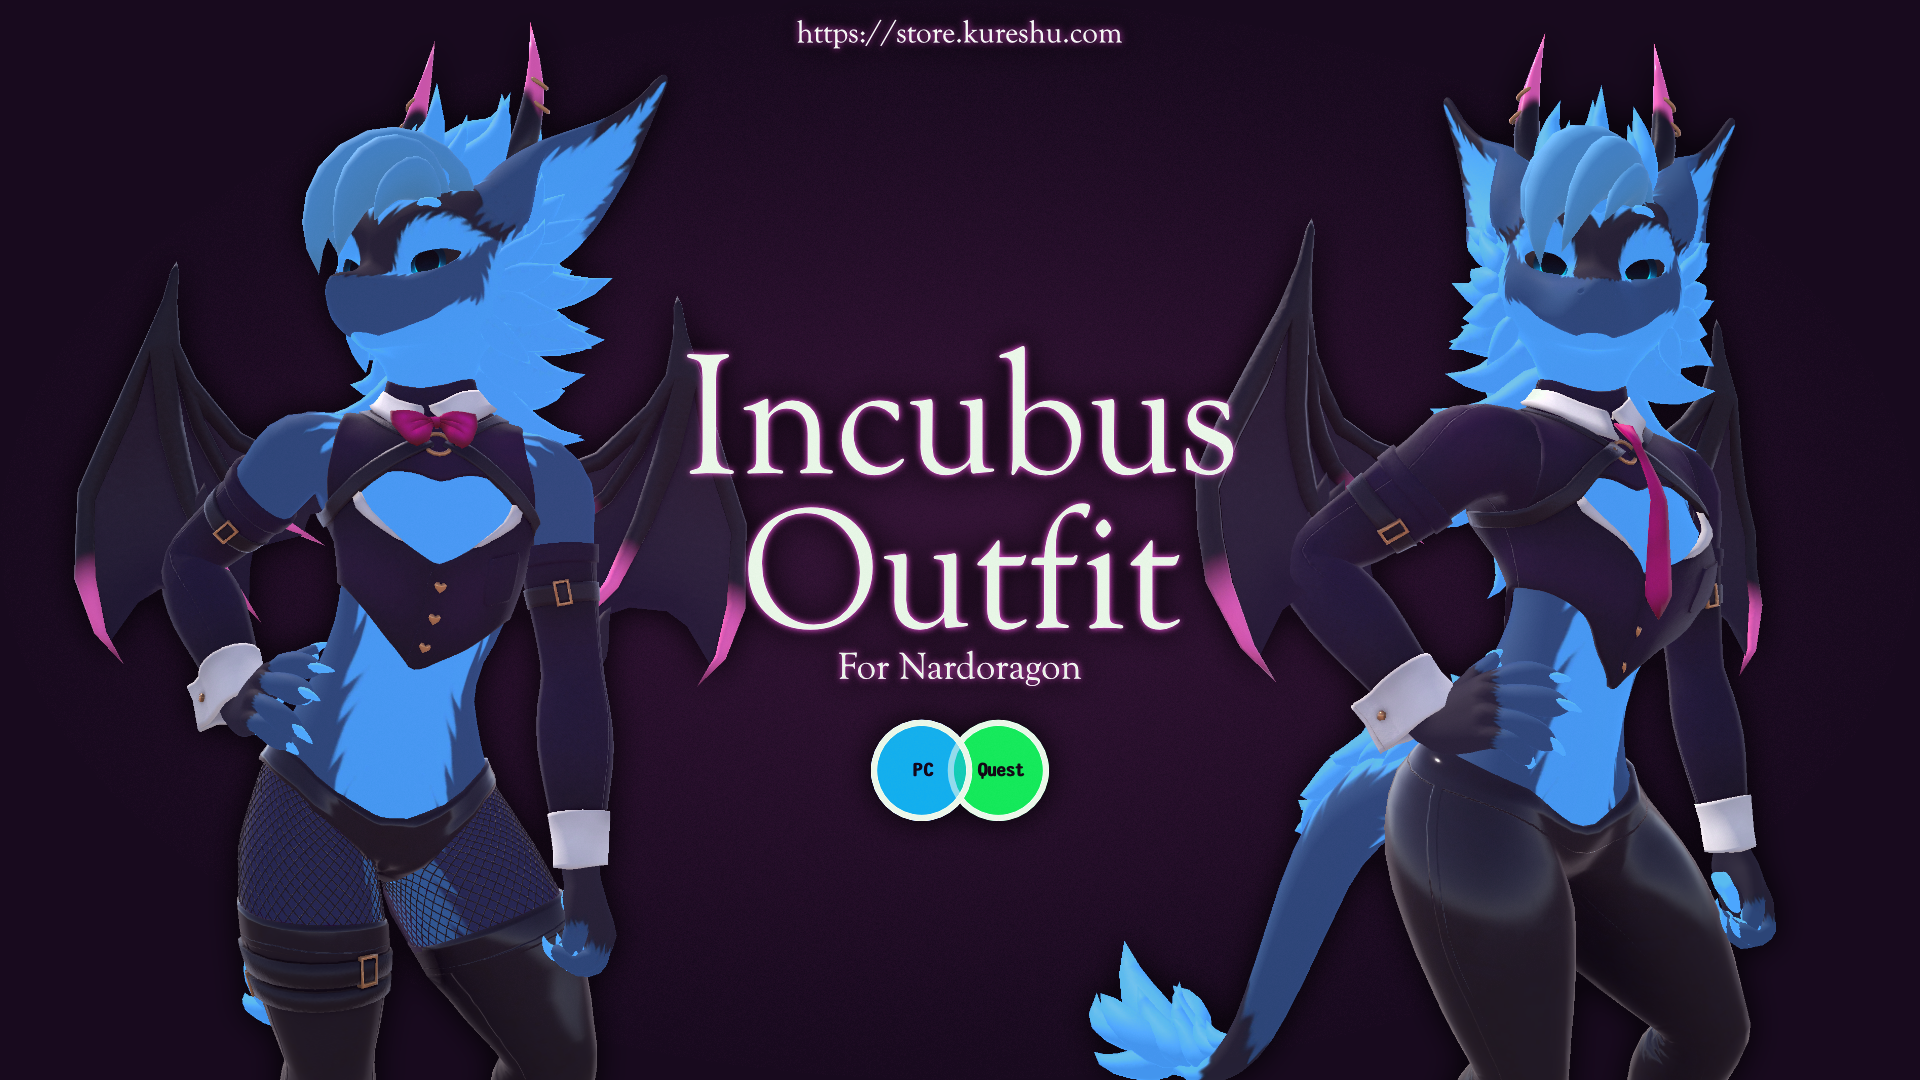 Nardoragon Incubus Outfit (VRChat PC and Quest Compatible)